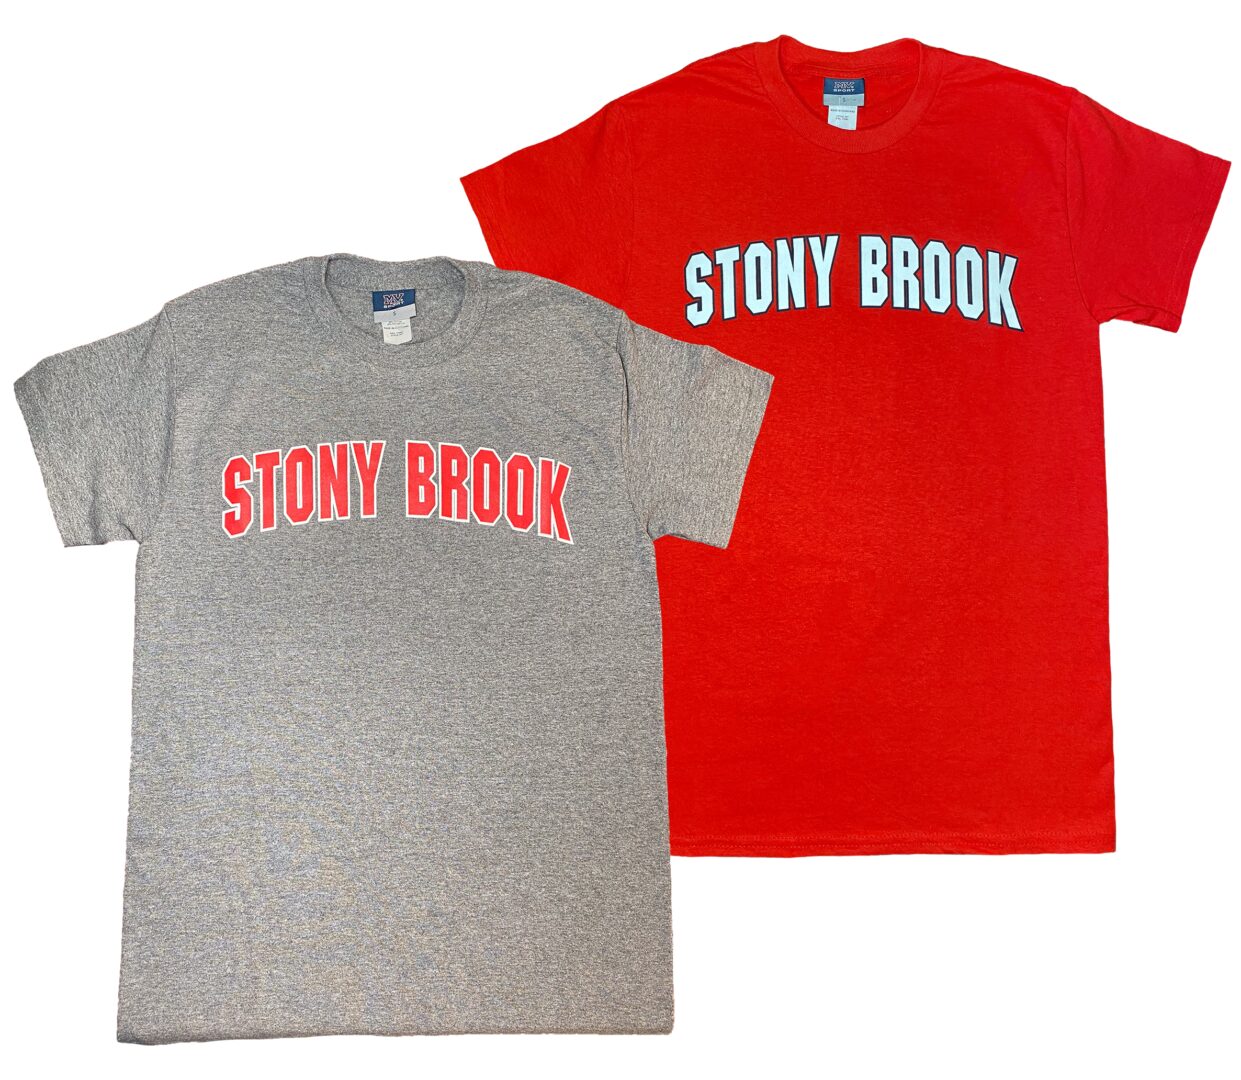 Grey tee shirt with the text stony brook arched across the center in red ink with a white outline and a red tee with the text stony brook arched across the center chest in white in with a black outline